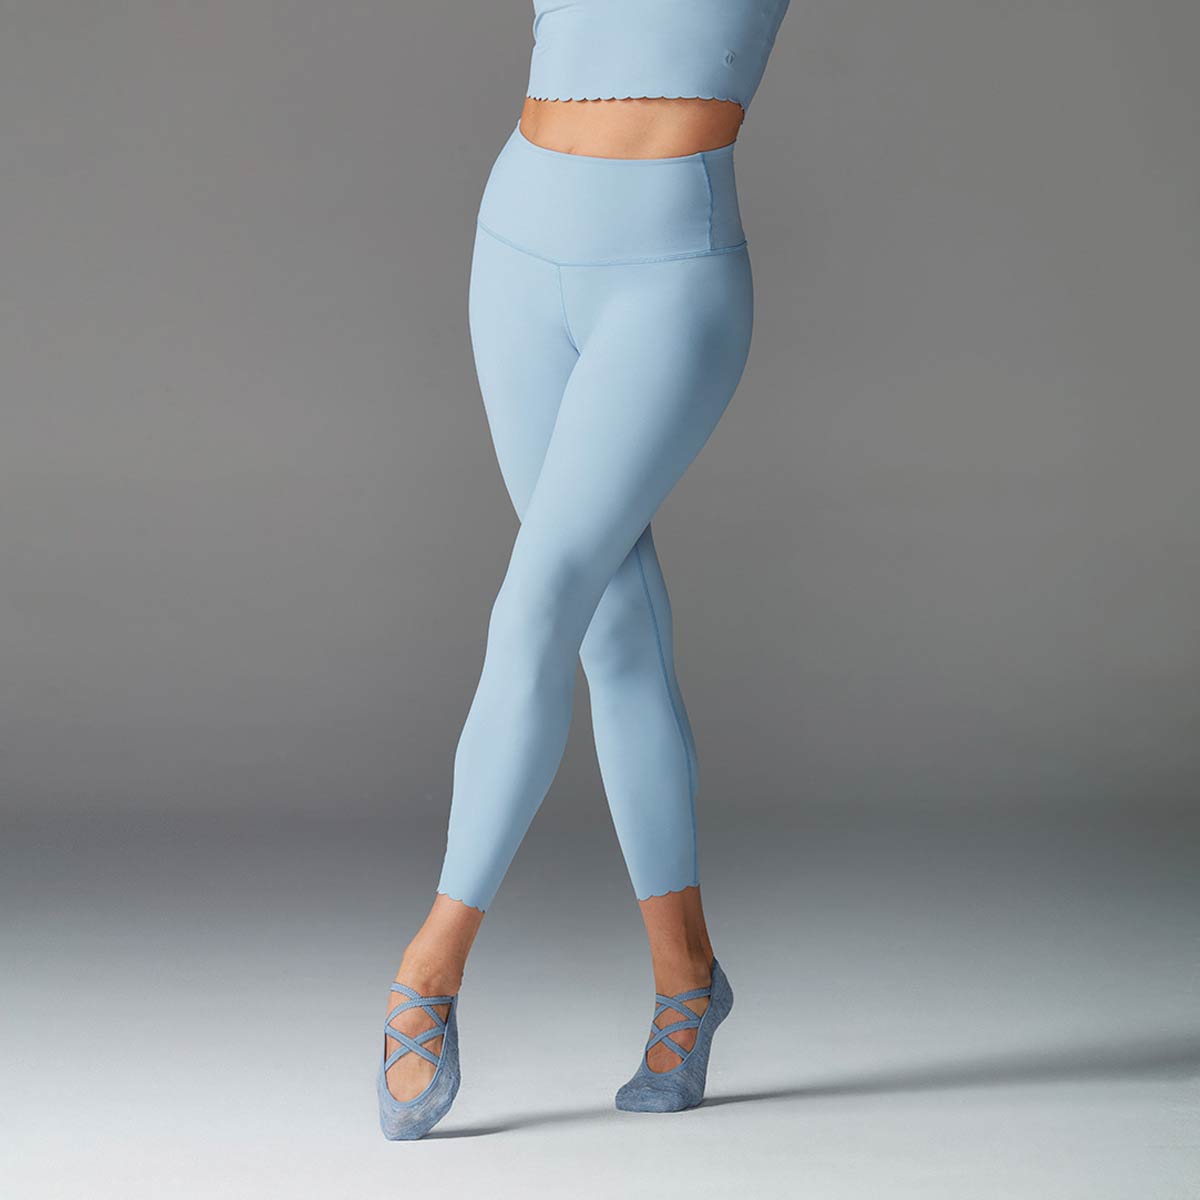 SCALLOP HIGH WAISTED 7/8 TIGHT SKY